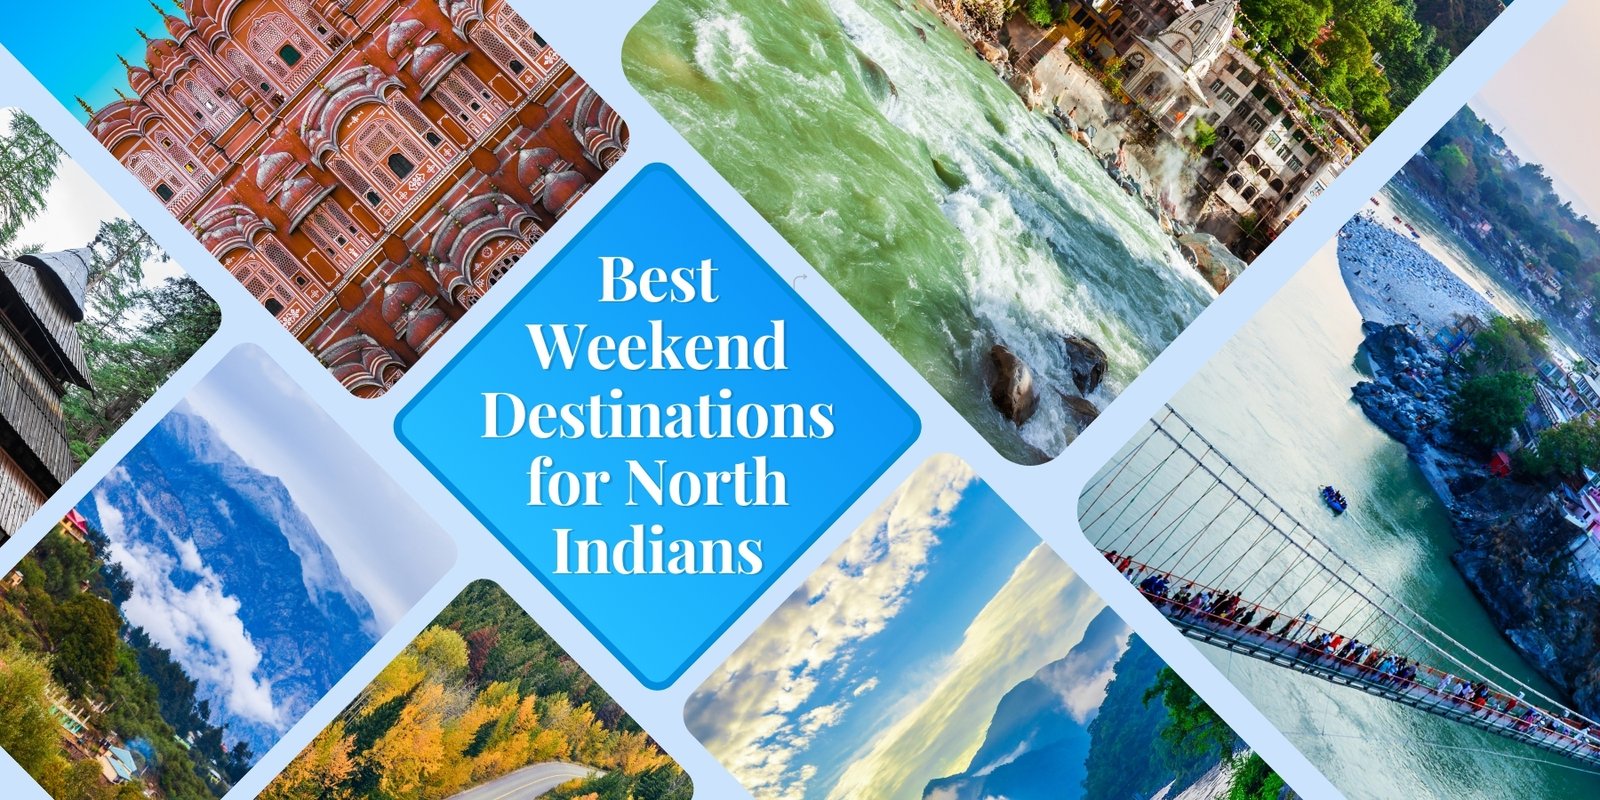 Best Weekend Destinations for North Indians